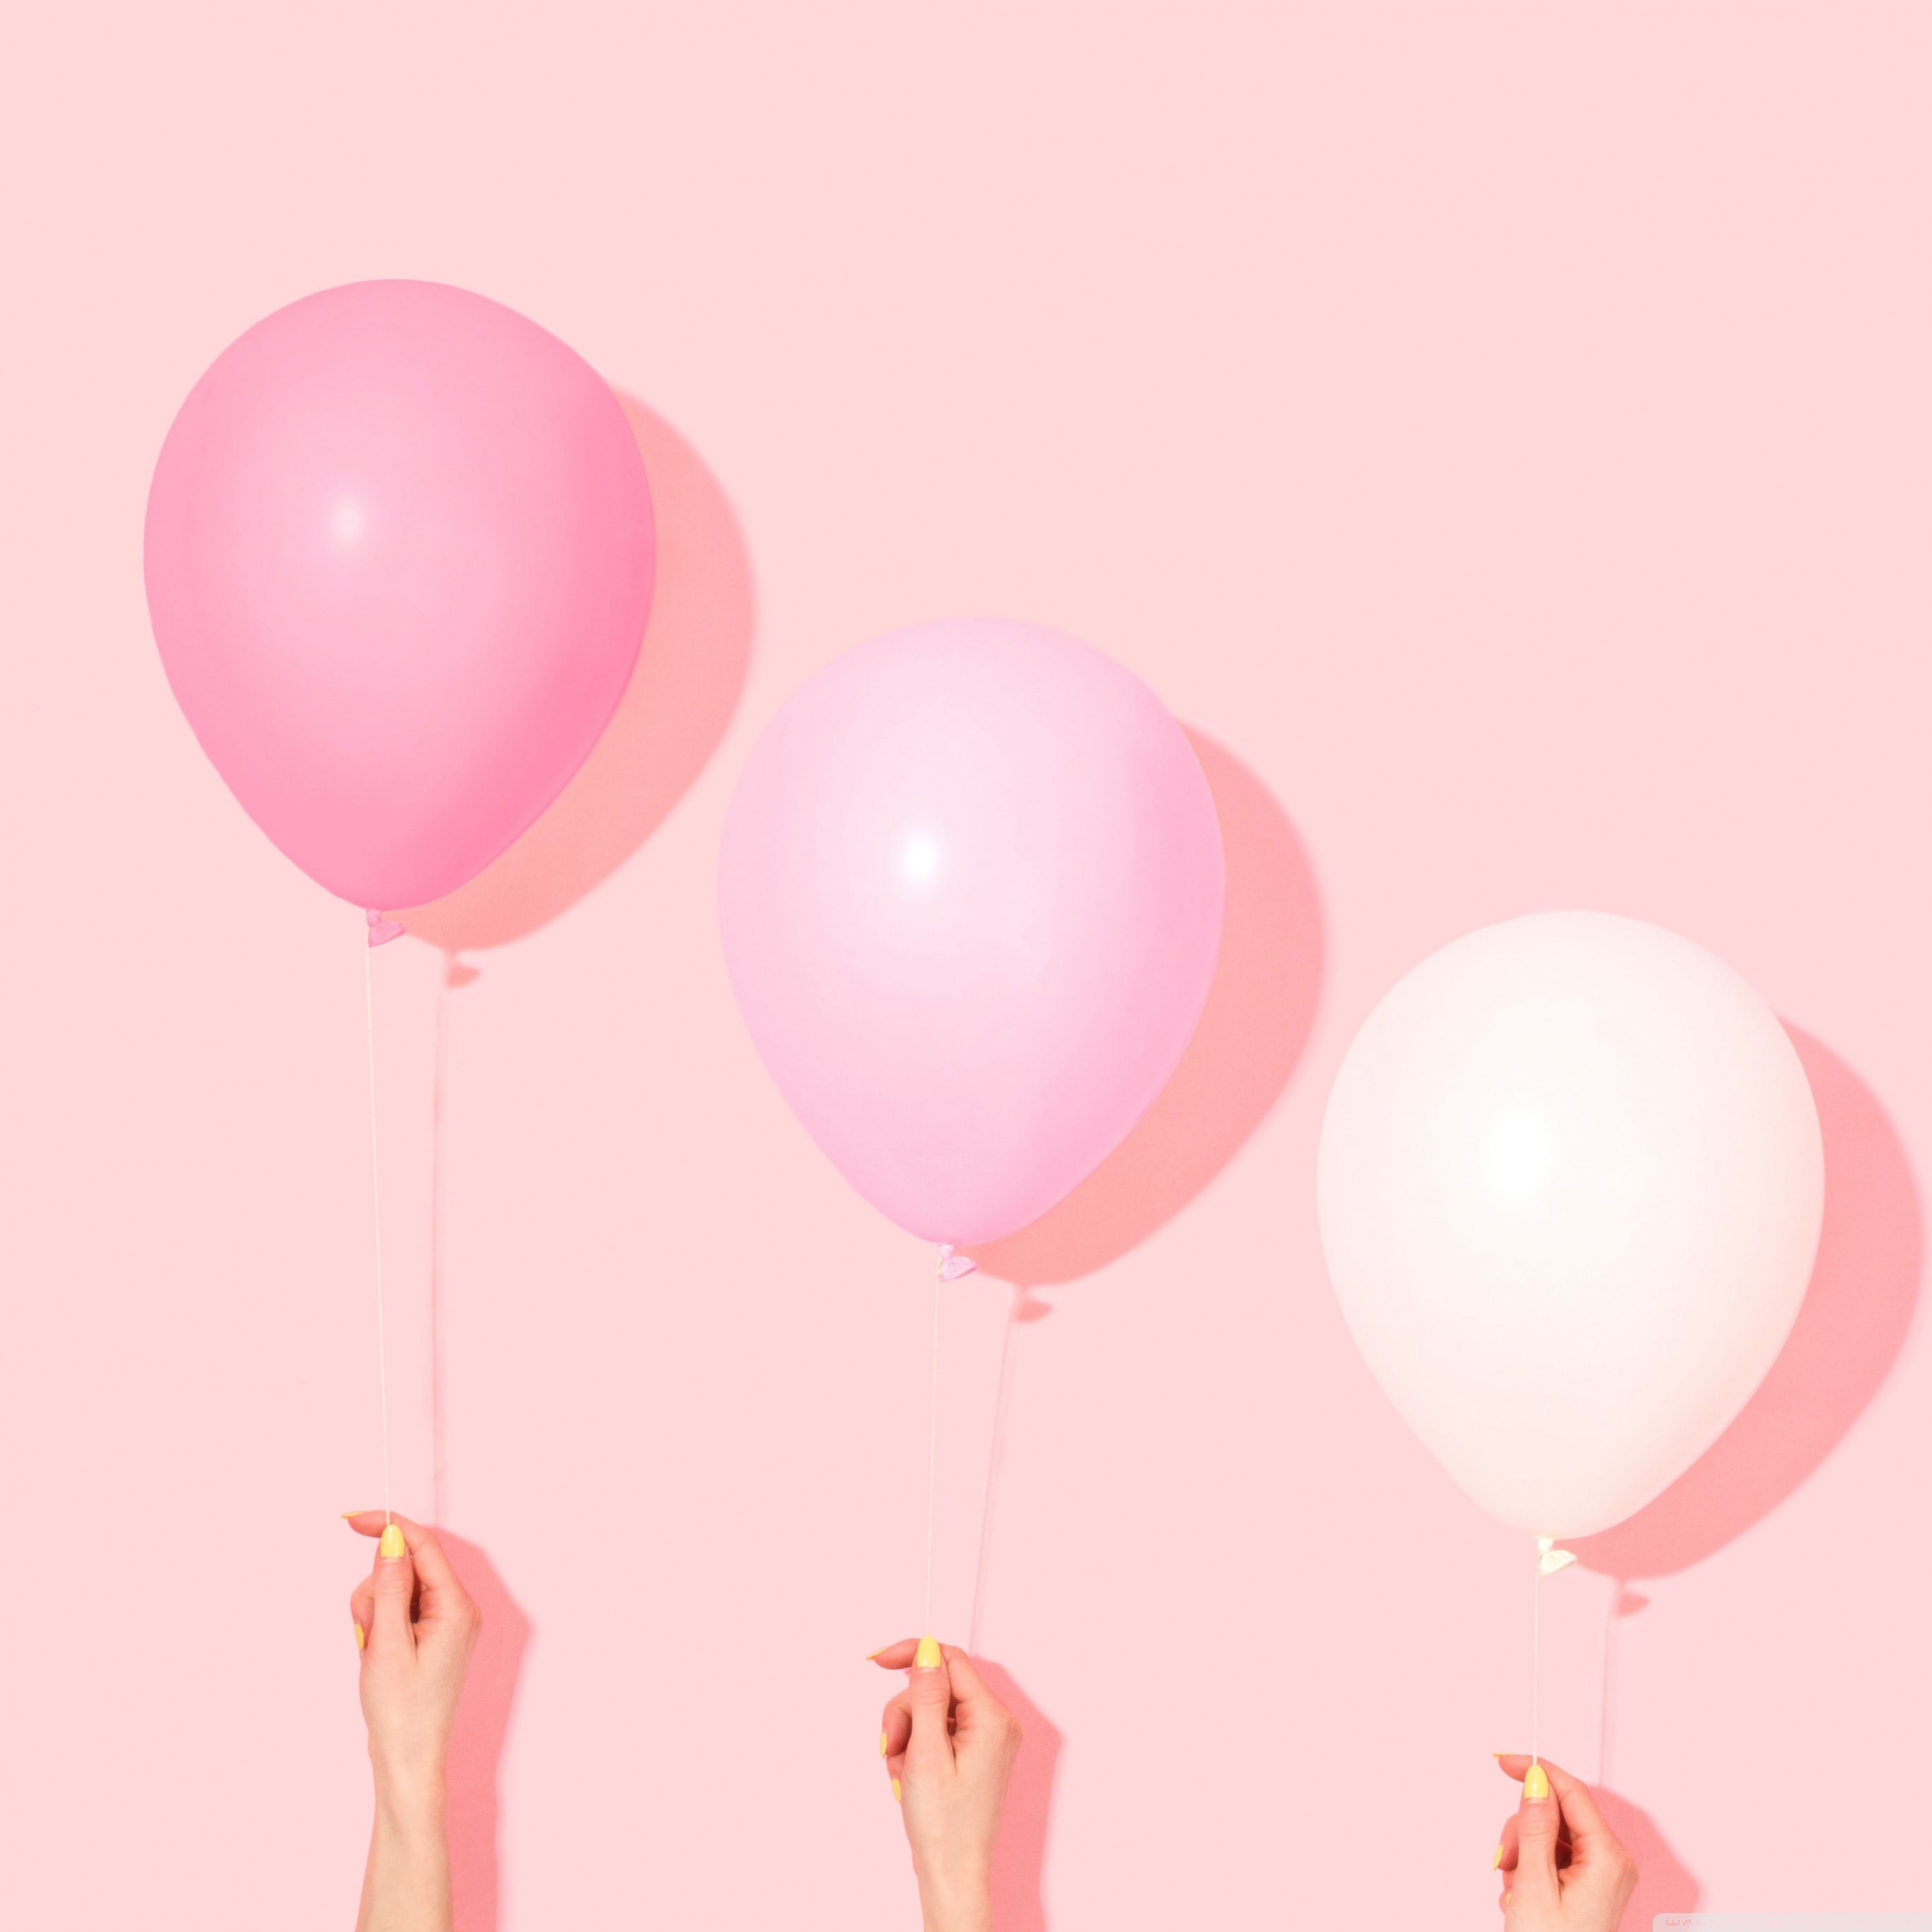 Three hands holding pink and white balloons on a pink background - Balloons